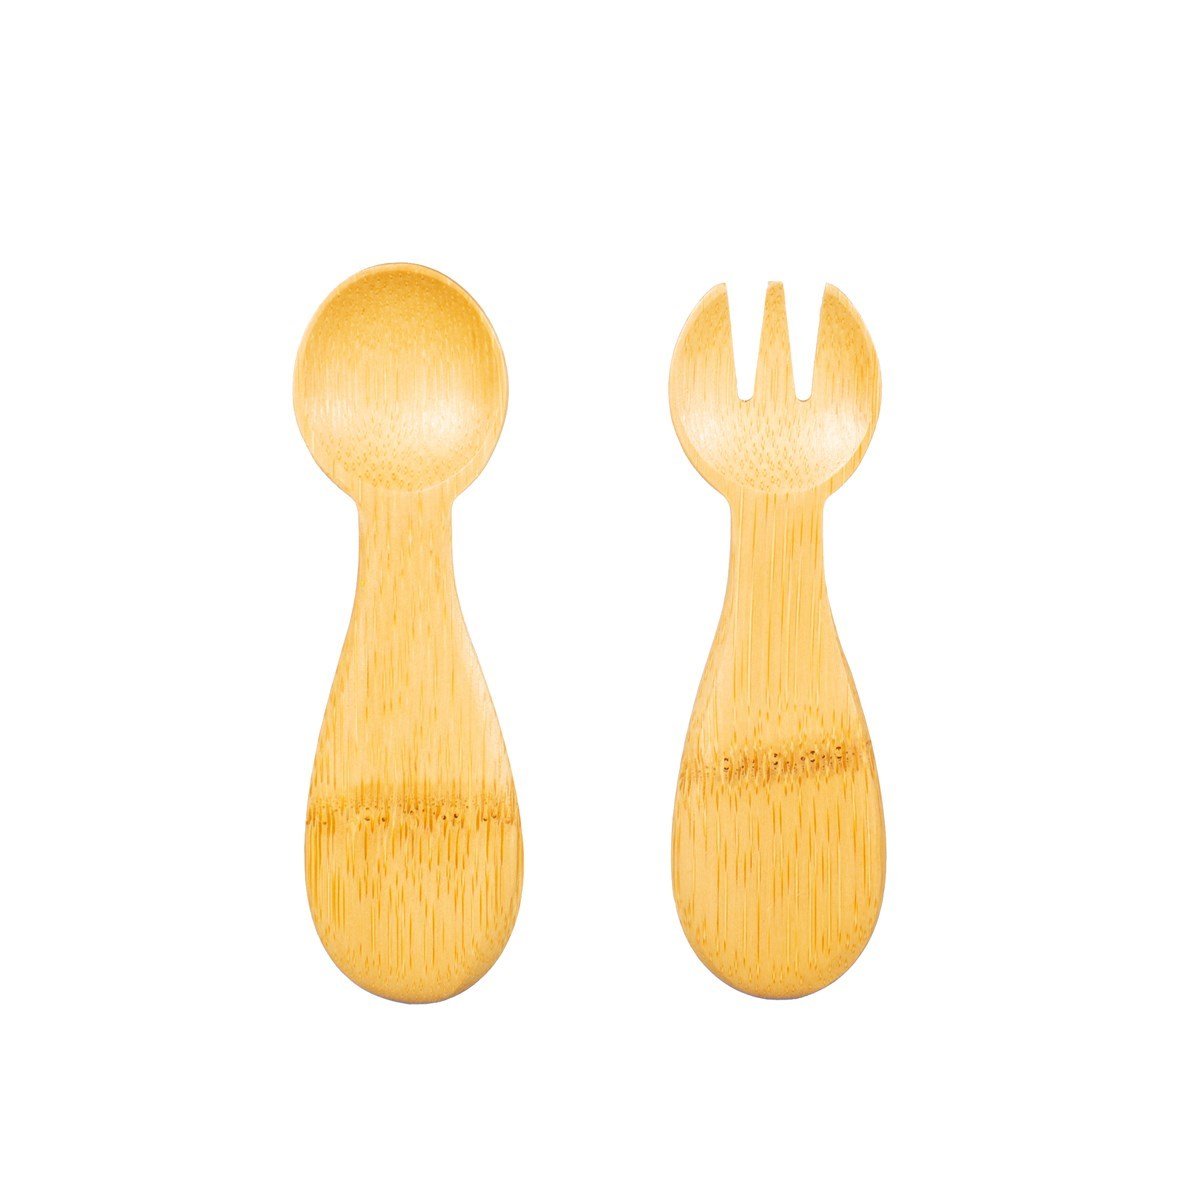 Kids Spoon and Fork - Set of 2